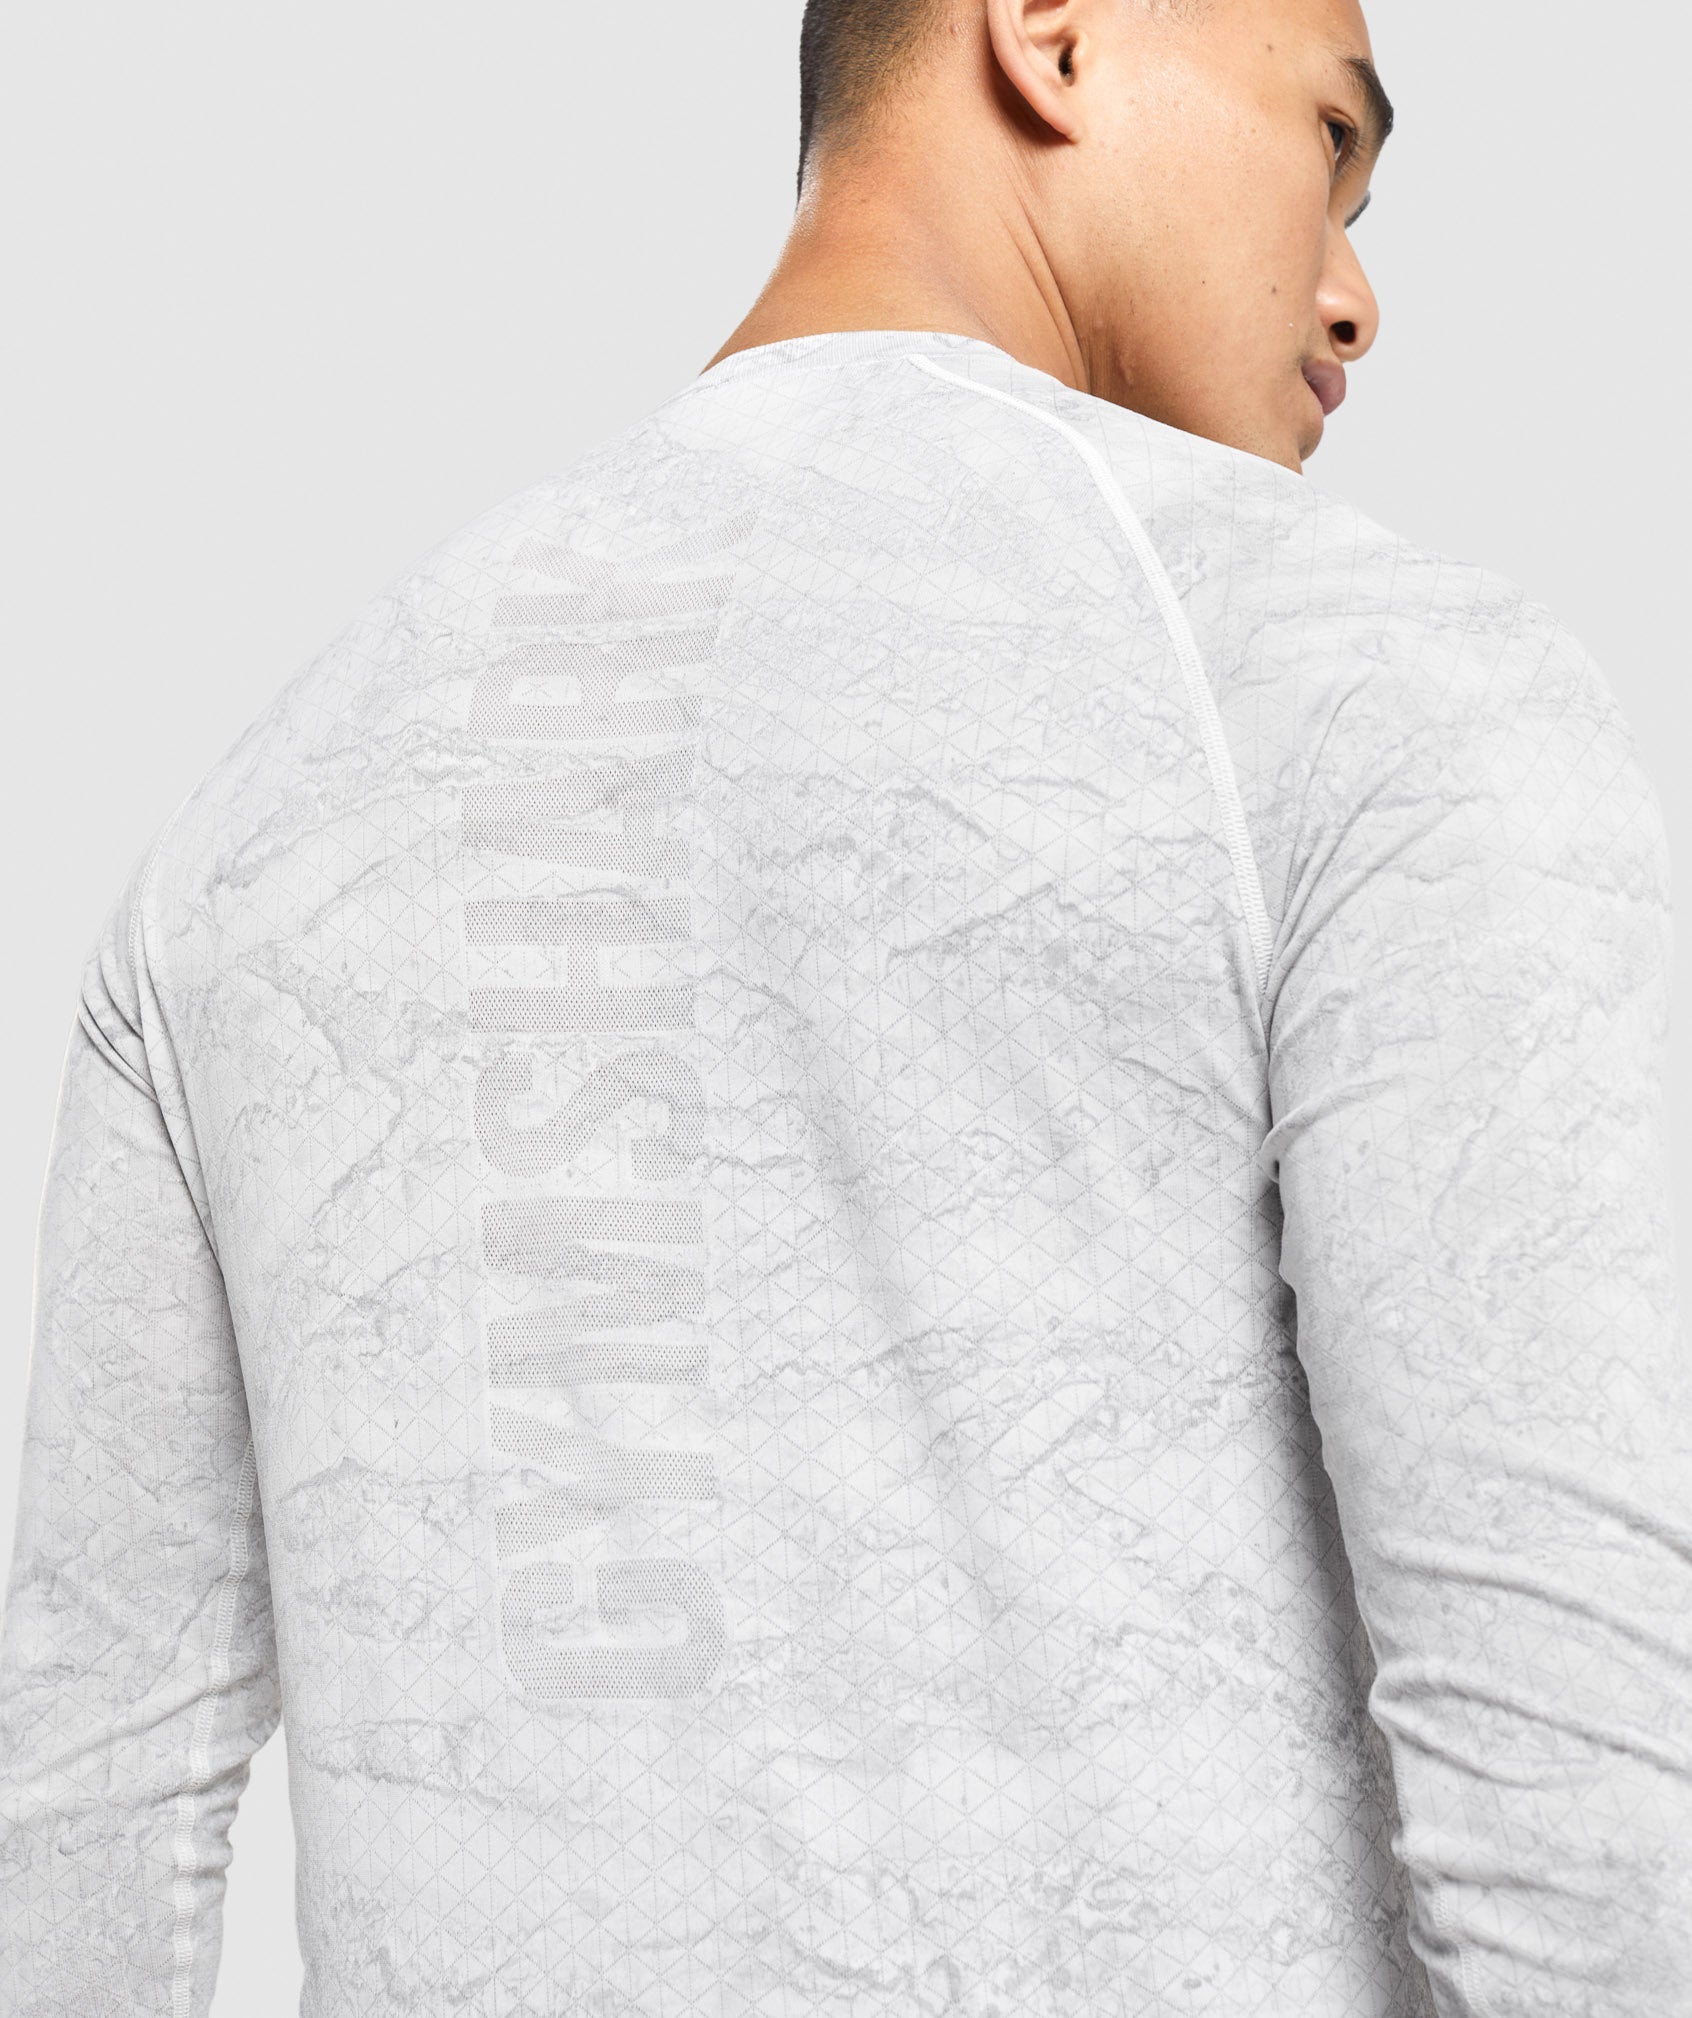 Geo Seamless Long Sleeve T-Shirt in Off White/Light Grey - view 5